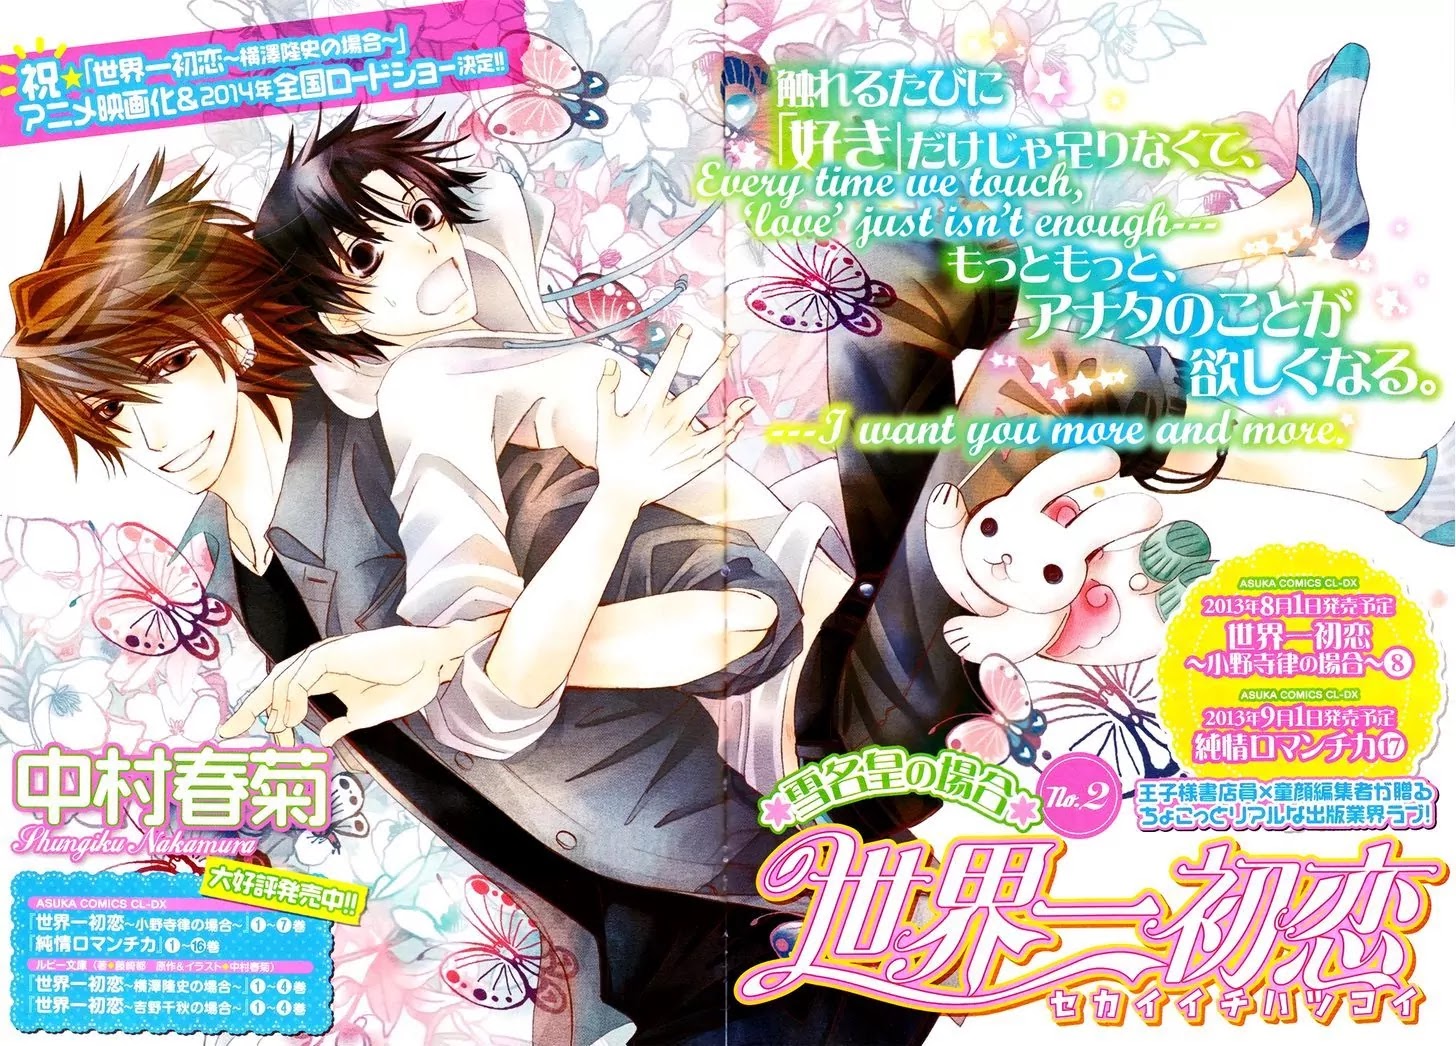 The World's Greatest First Love: The Case Of Ritsu Onodera Chapter 11.5: The Case Of Yukina Kou #2 - Picture 2